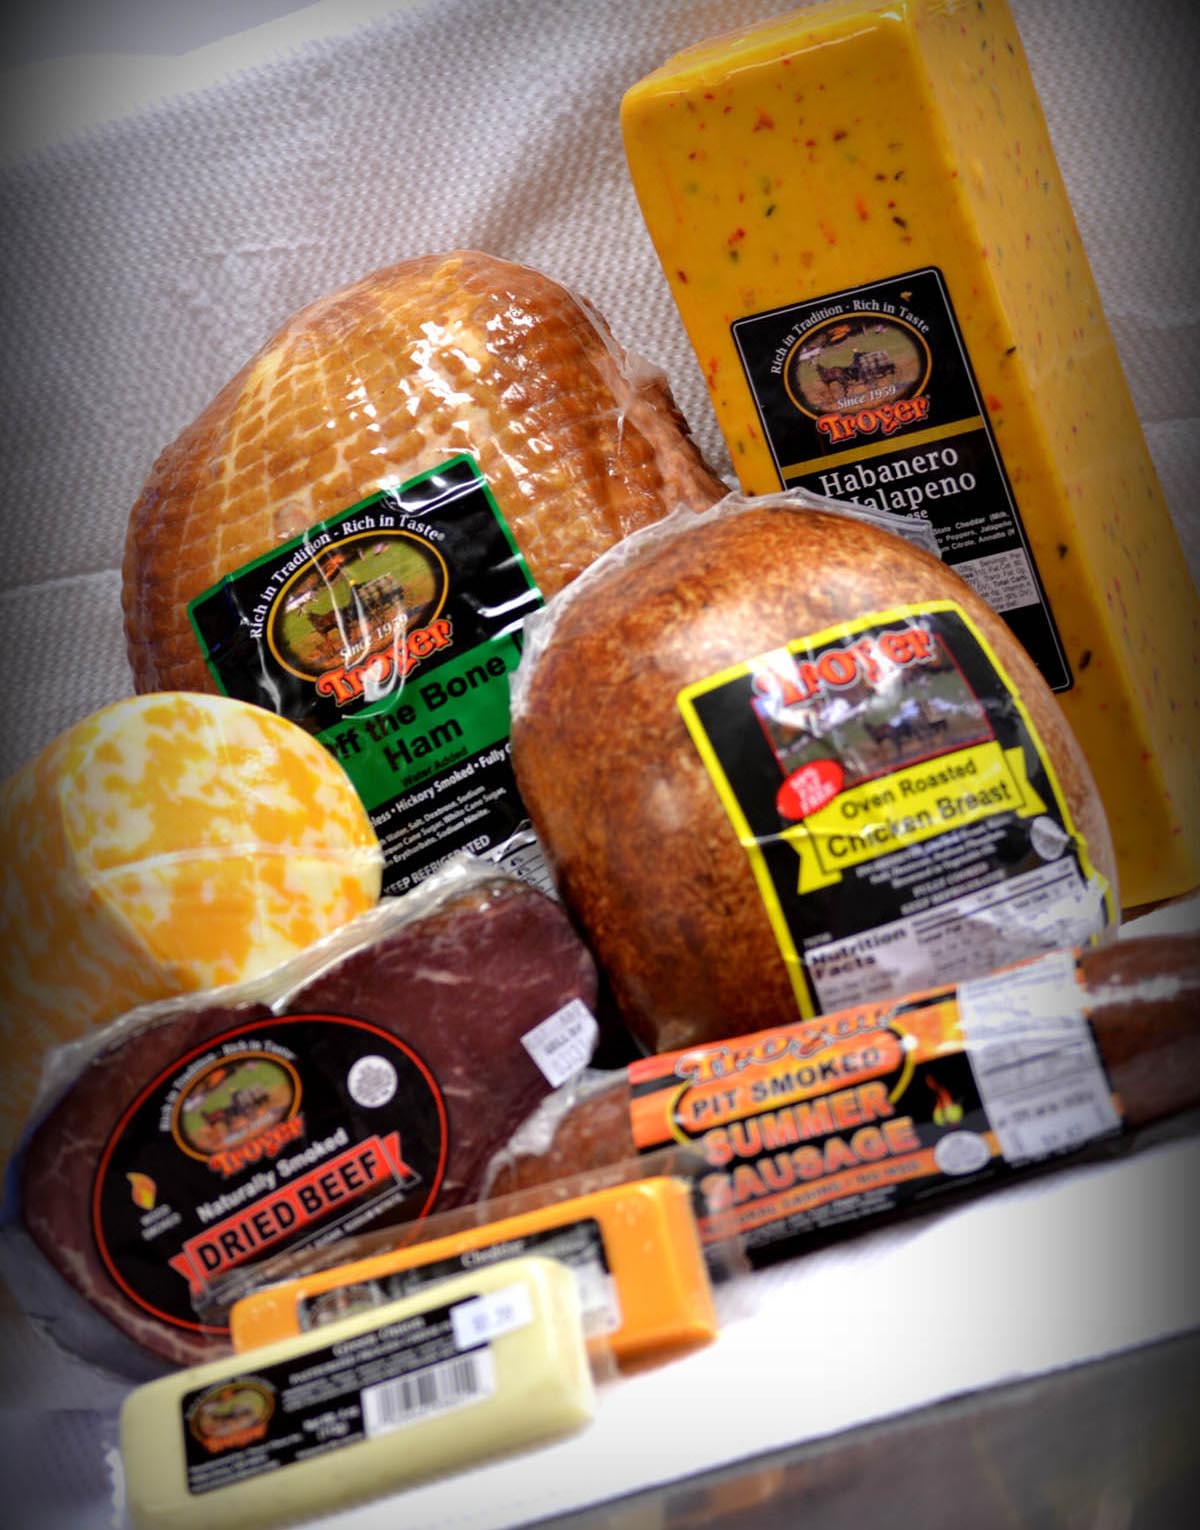 Troyer’s brand meat and cheeses